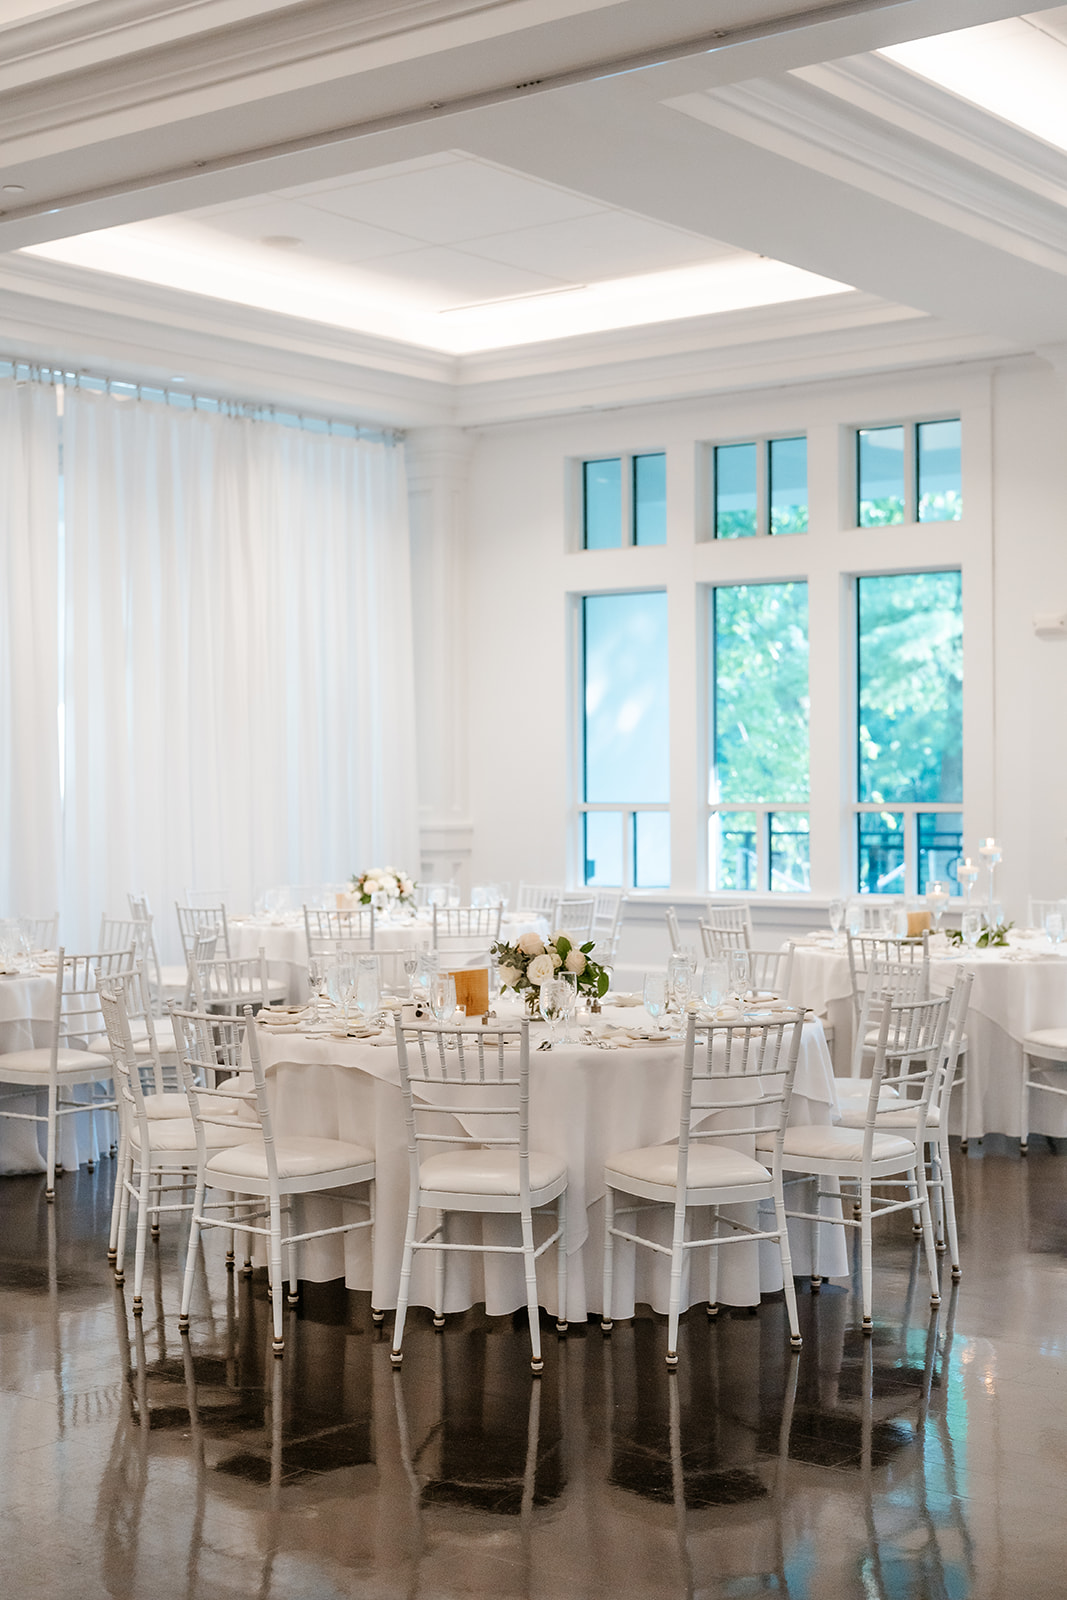 Elegant dining setup in a bright banquet hall with white decor and natural light.